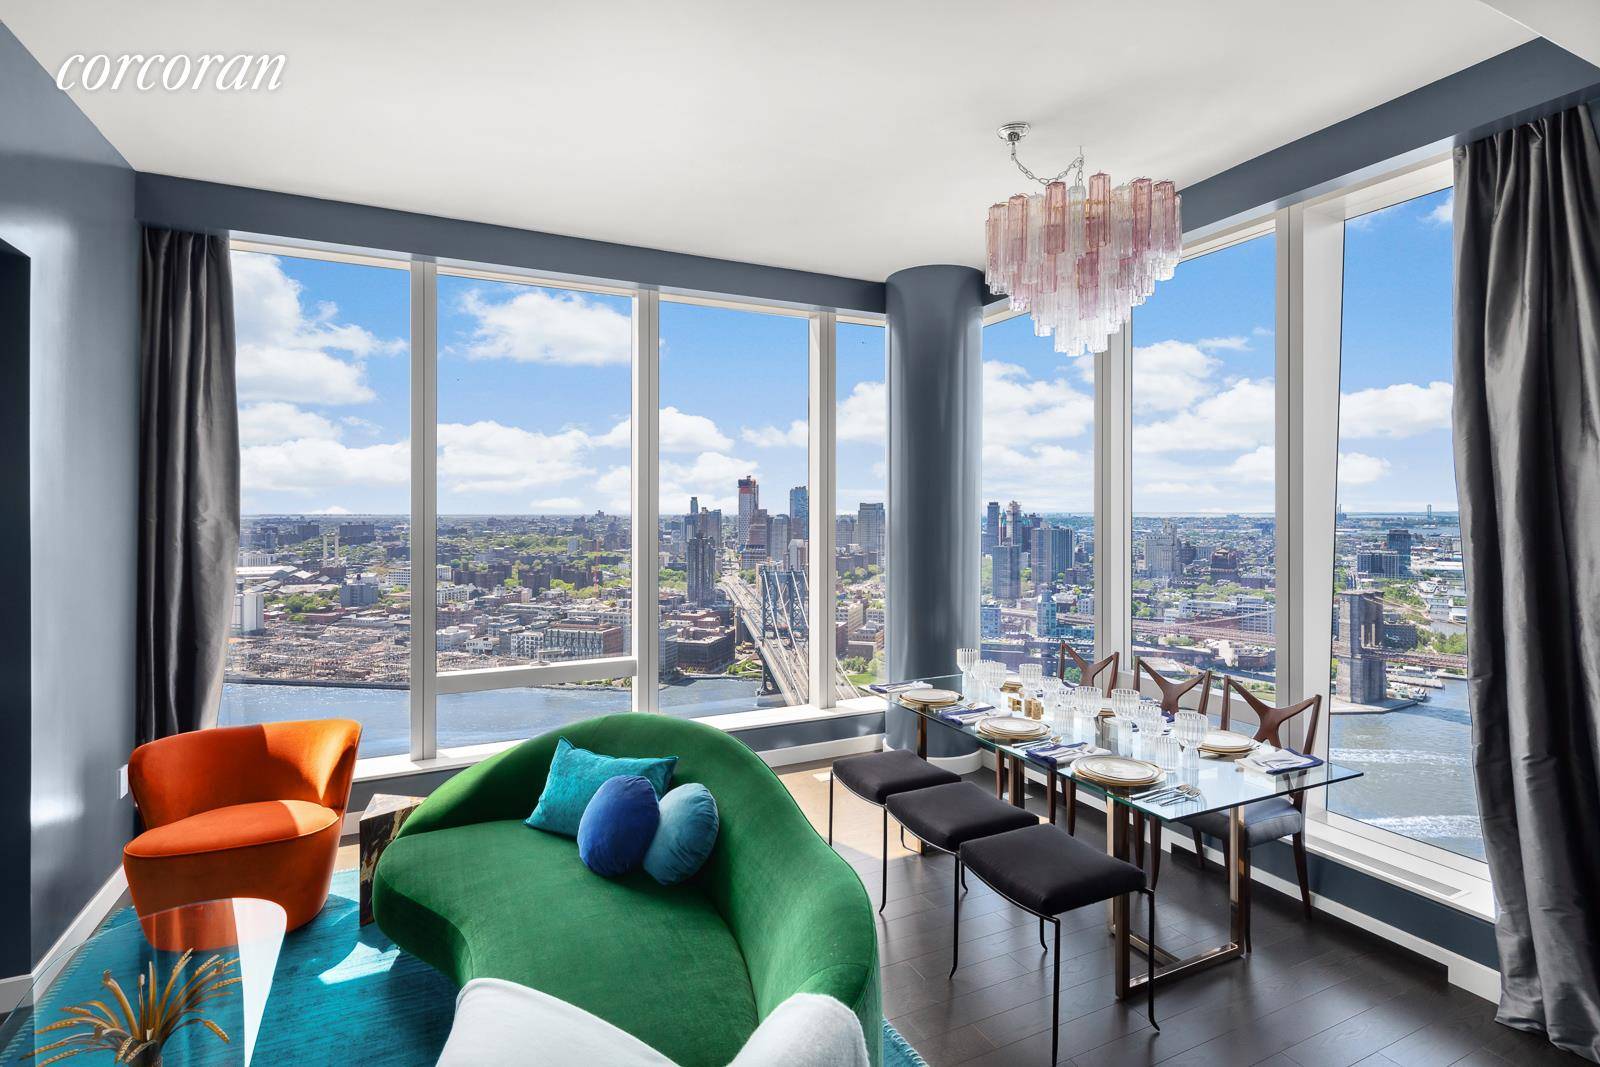 ONE MANHATTAN SQUARE OFFERS ONE OF THE LAST 20 YEAR TAX ABATEMENTS AVAILABLE IN NEW YORK CITY Residence 12D is a 1, 123 square foot two bedroom, two bathroom with ...